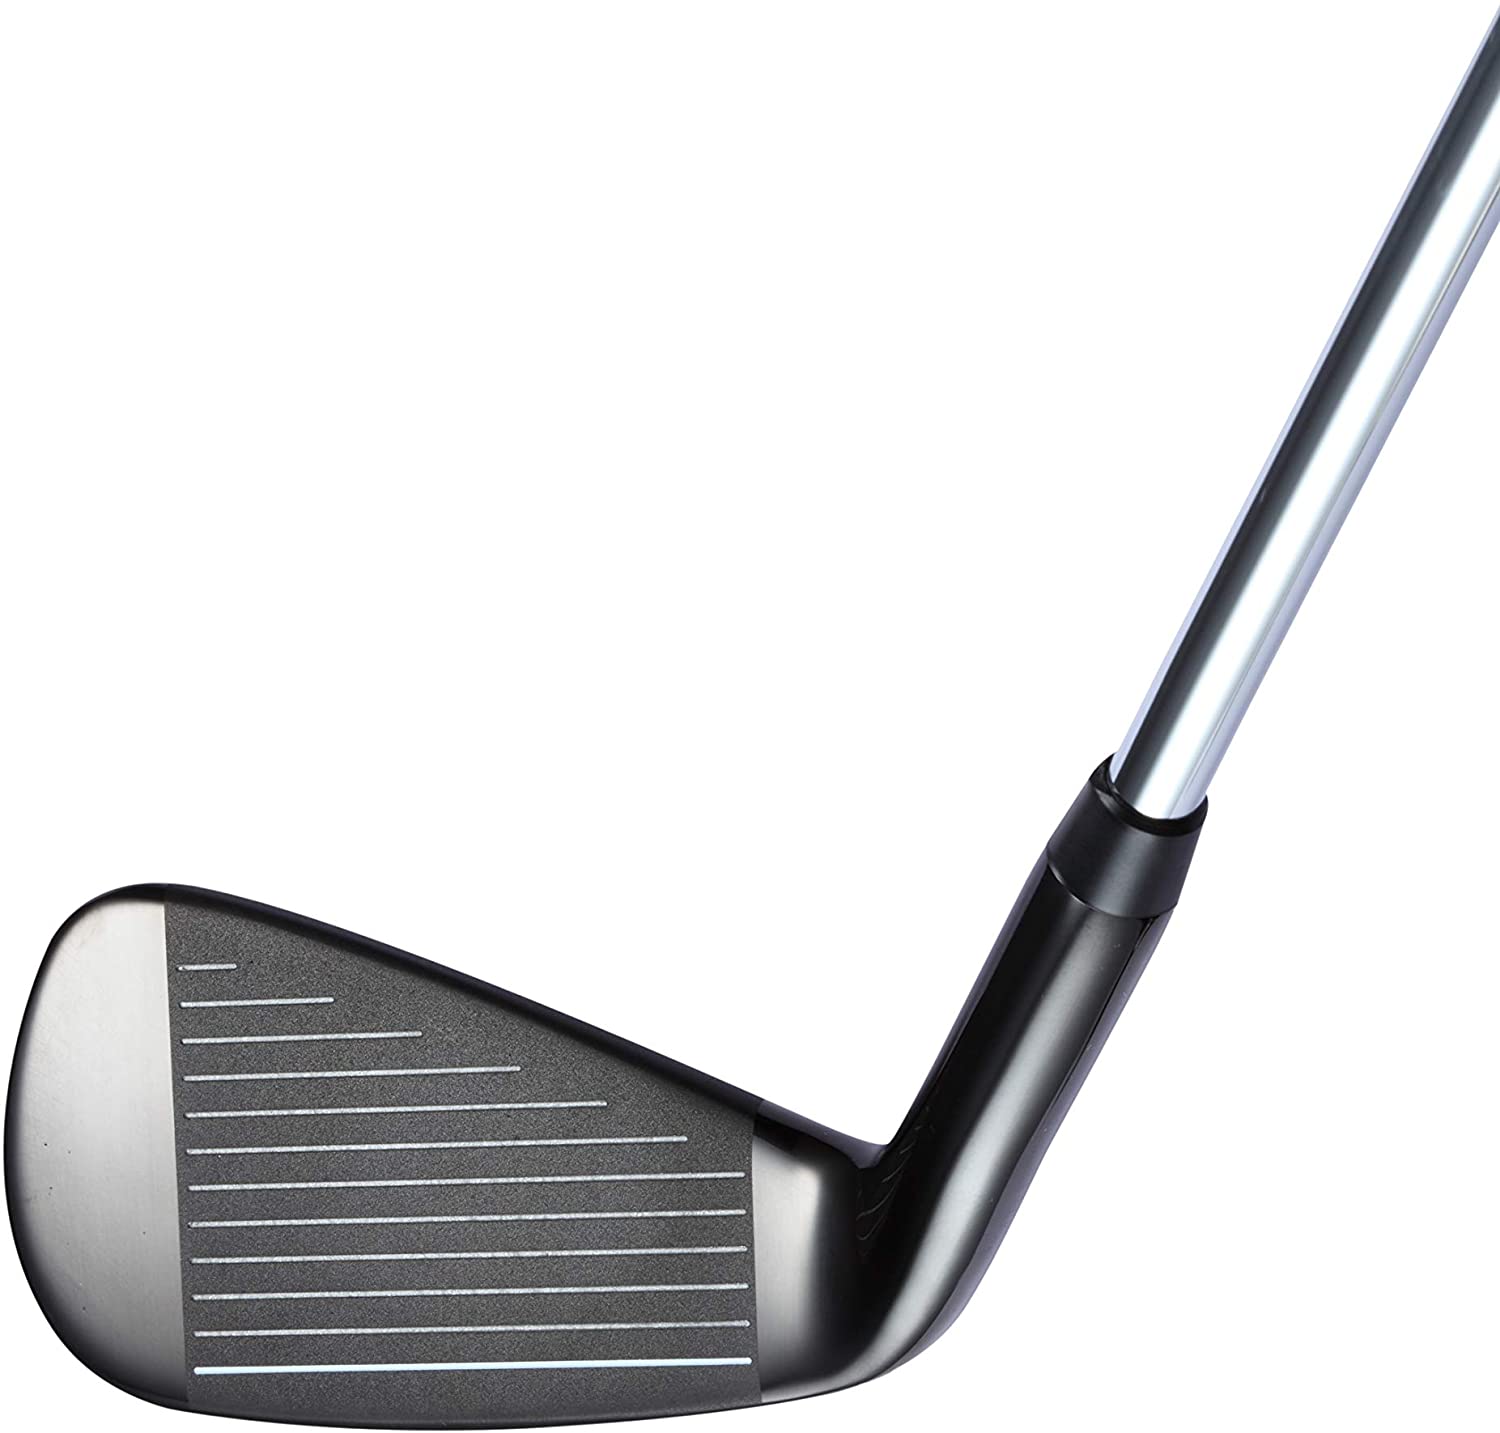 Best Golf Irons for Beginners That Give You Control & Distance